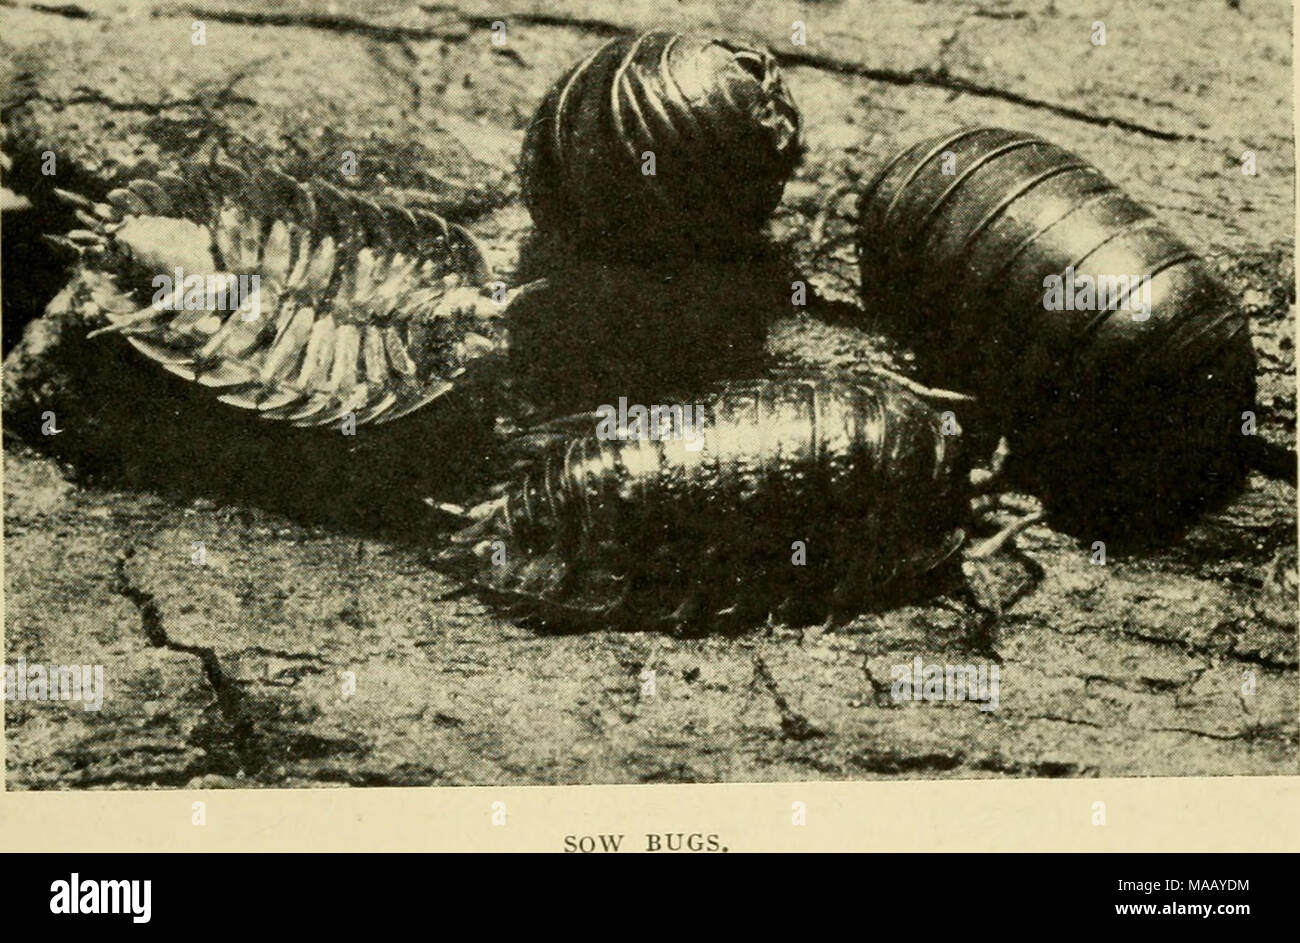 . Dwellers of the sea and shore . unlike that of the familiar terrestrial isopod crustacean called the &quot;sow bug.&quot; After the manner of the sow bug it was able to roll itself up into a ball, and in this posi- tion its fossil has often been found. Formerly the two were thought to be related, but, notwithstanding cer- tain of its crustacean characteristics, the trilobite has in recent years been classified with the Arachnida, a group including the spiders and scorpions. The truth Stock Photo